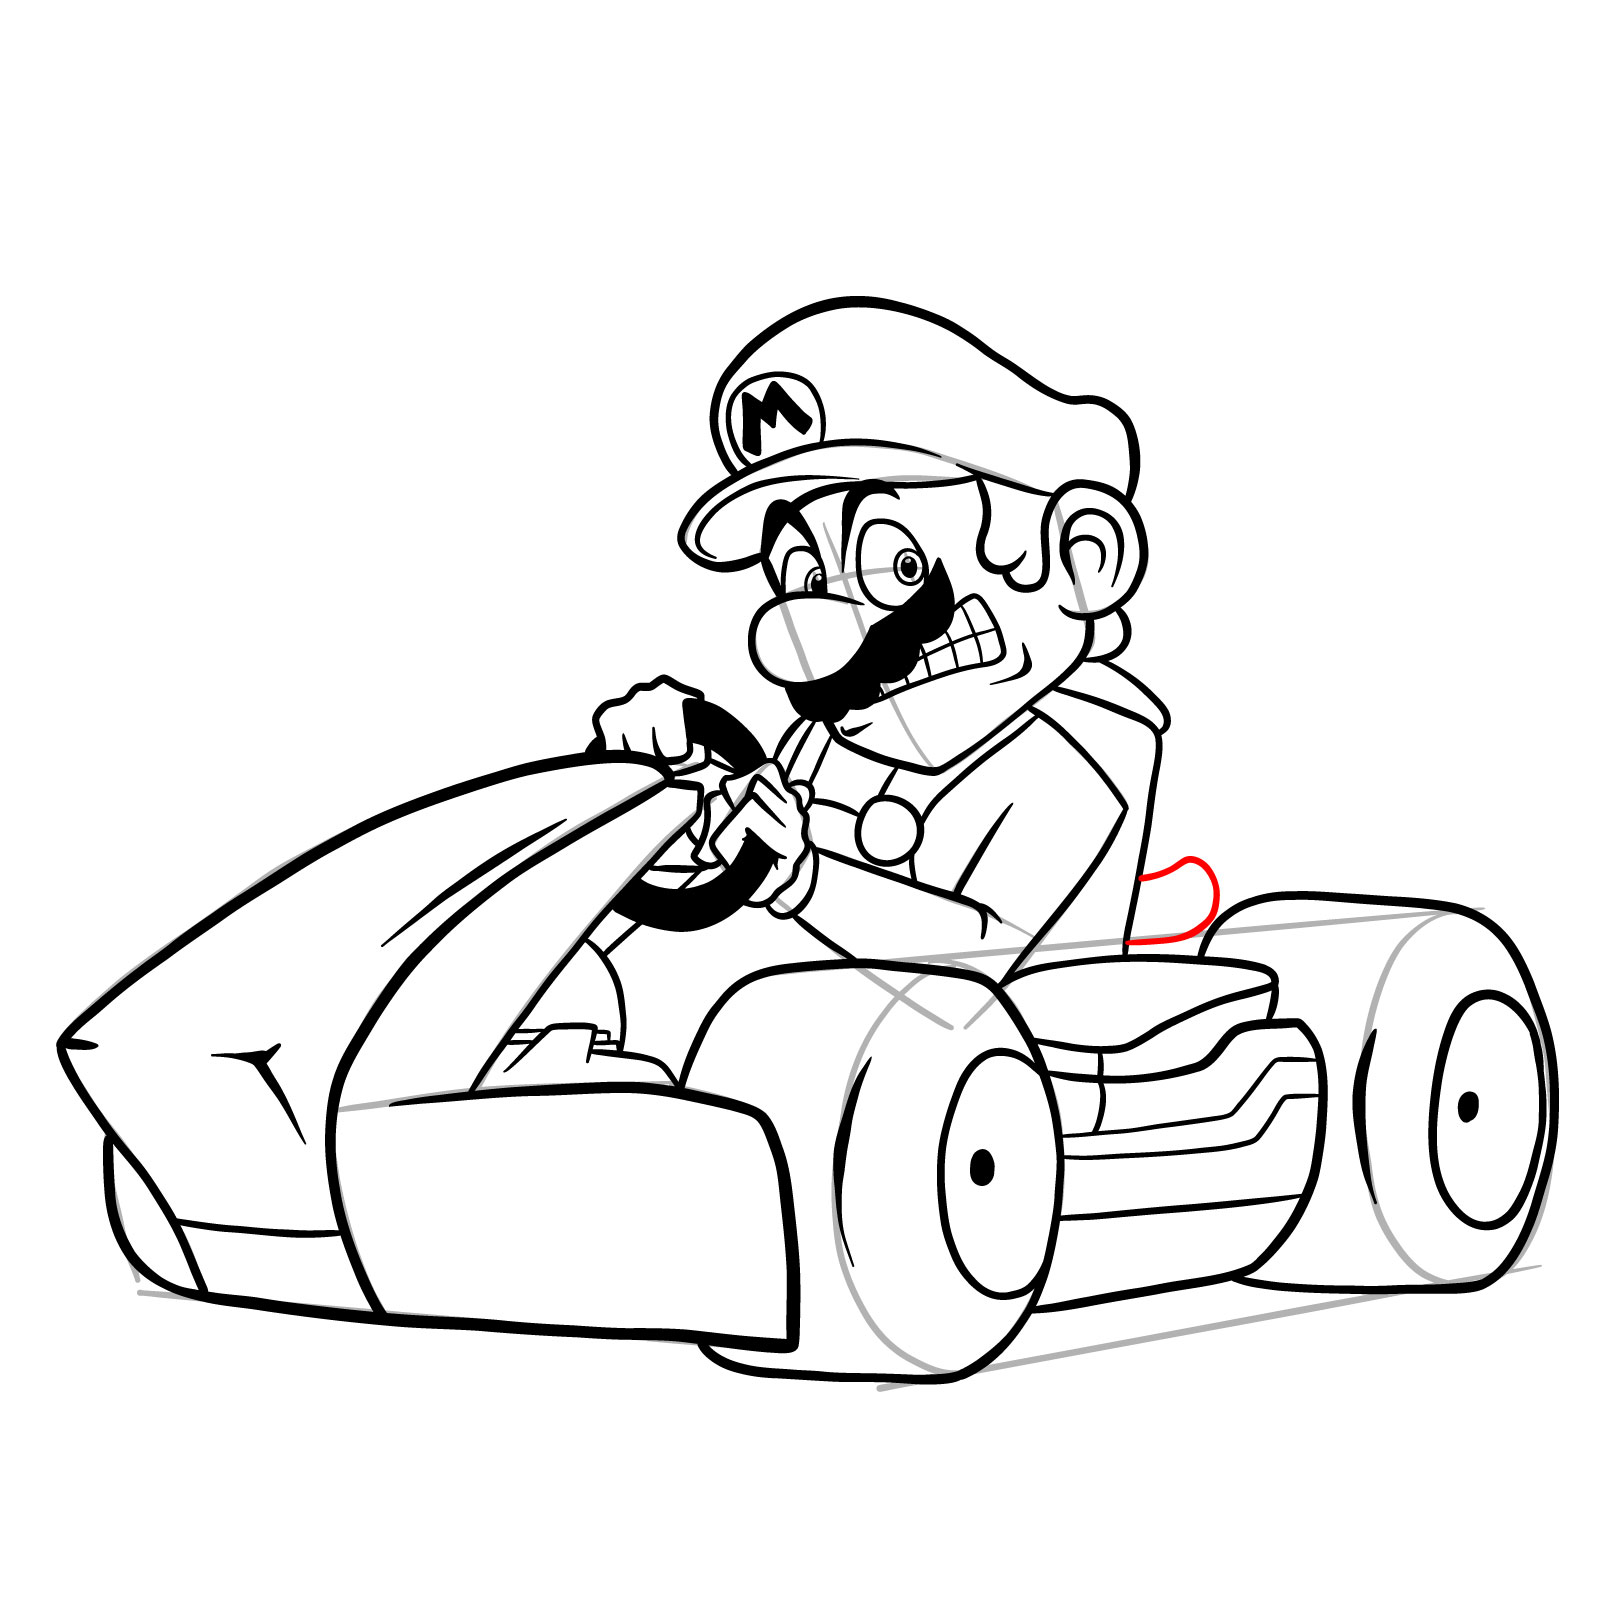 How to draw Race Traitors Mario - step 41